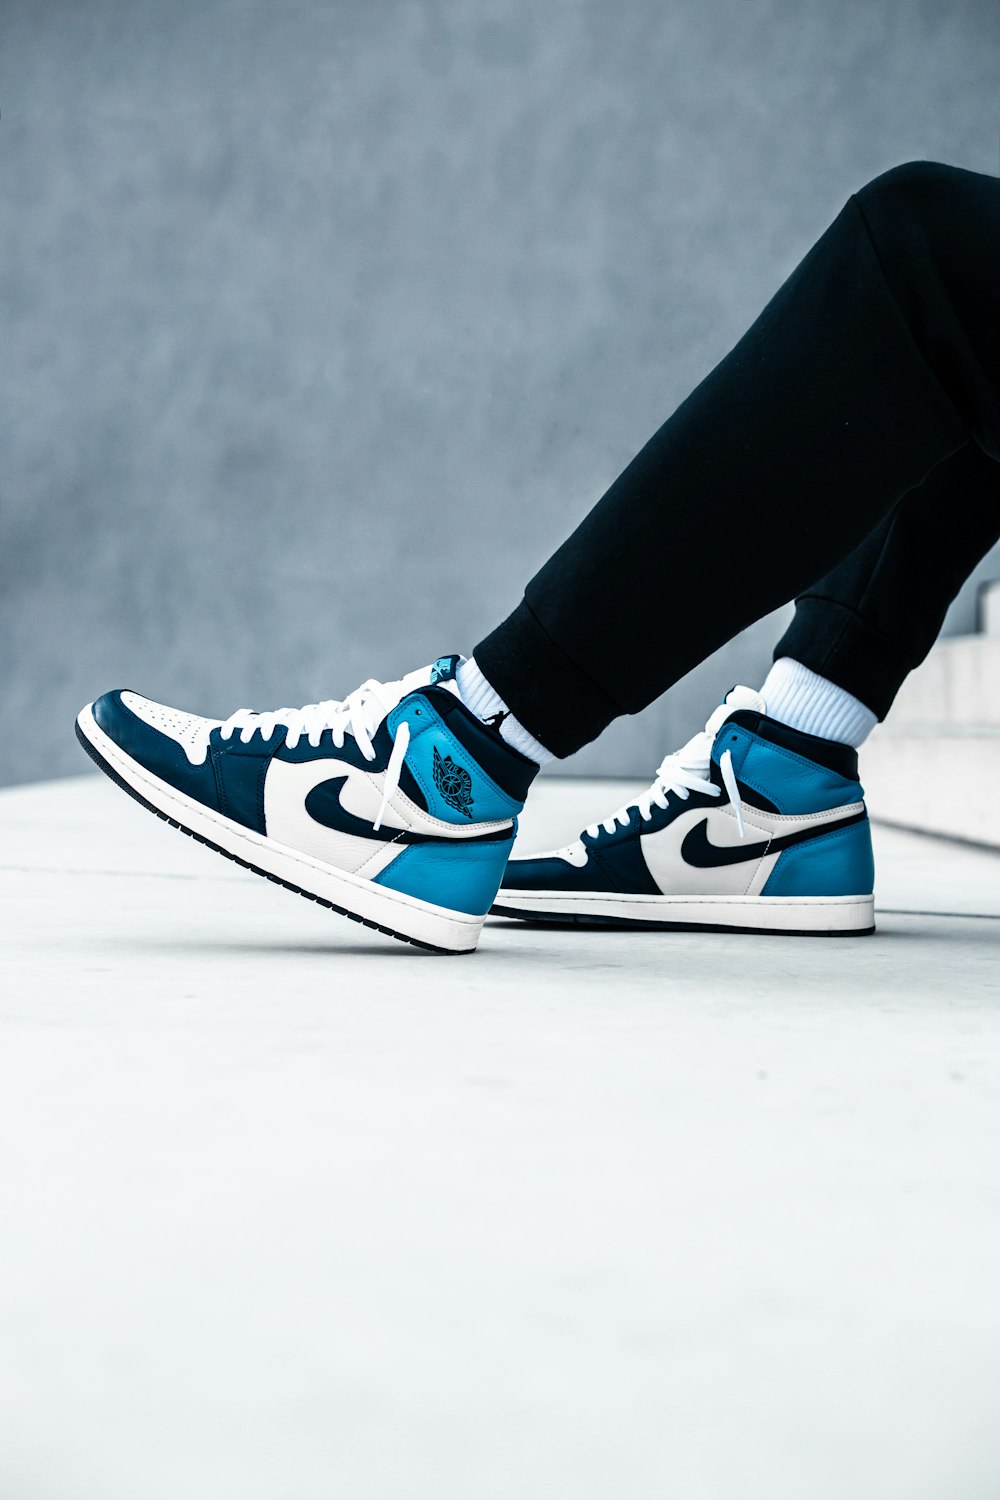 person wearing black pants and blue and white nike sneakers photo – Free Slovensko Image on